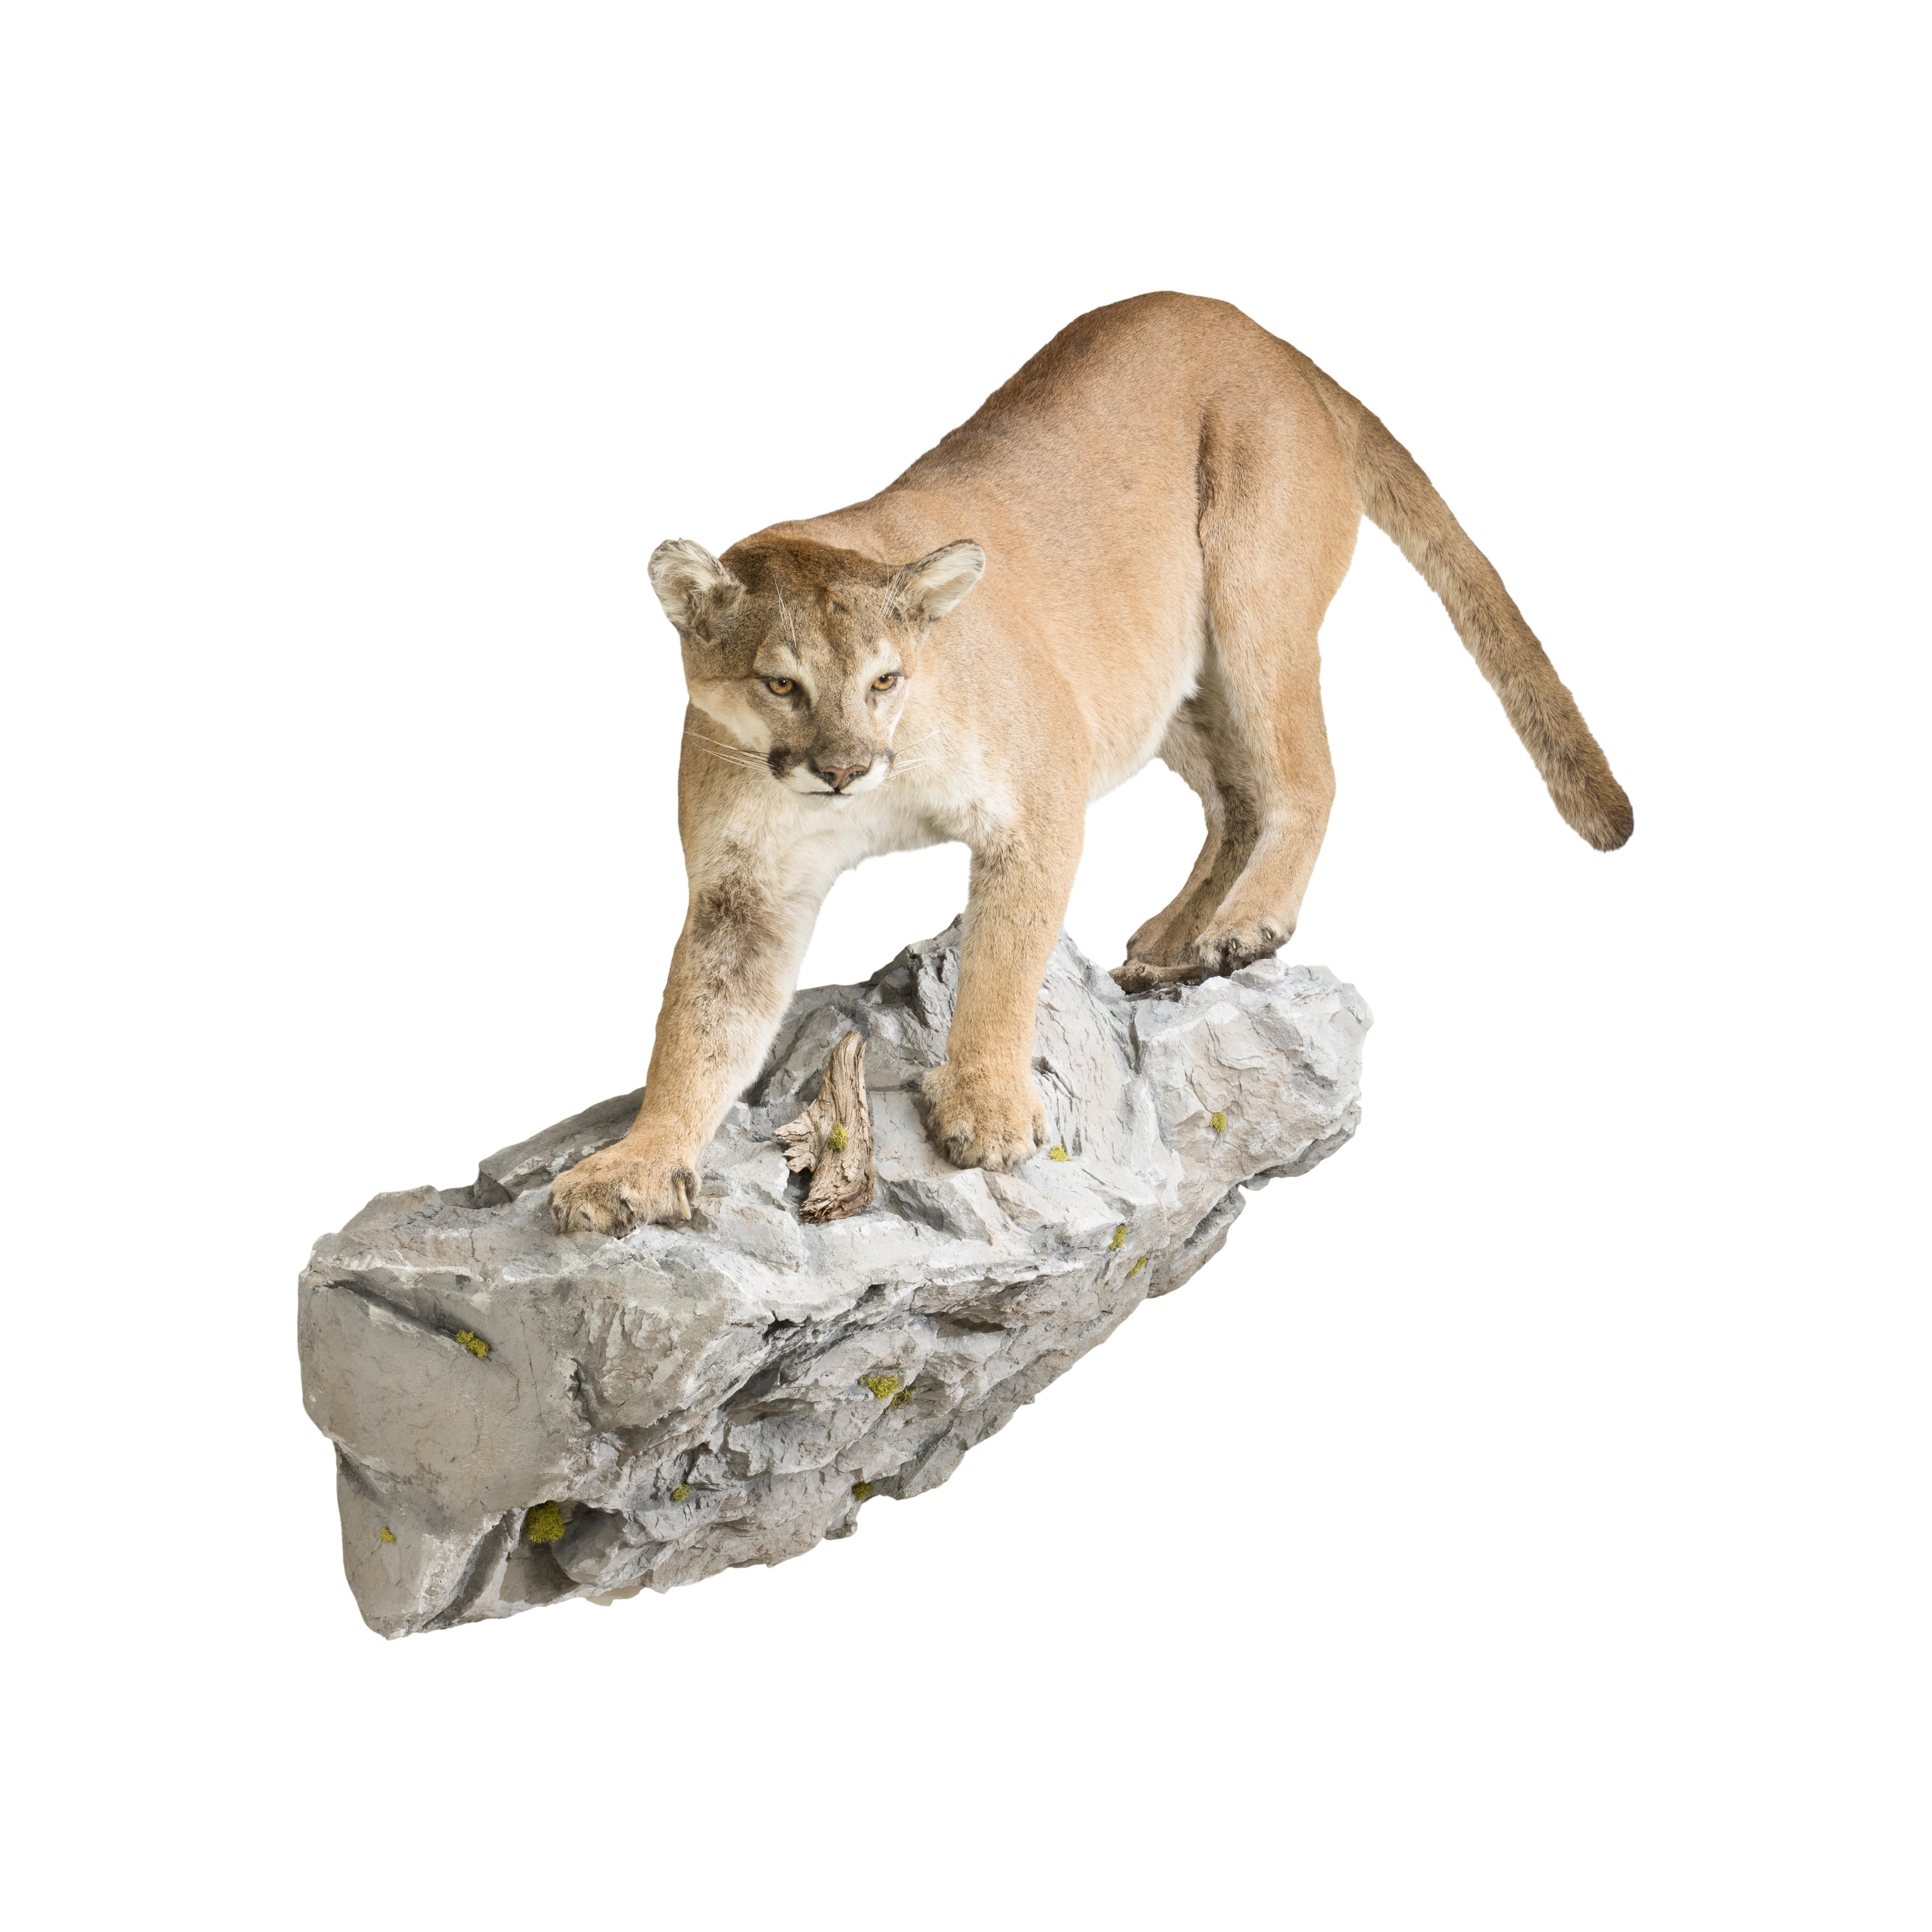 Other Huge Idaho Cougar Taxidermy Mount on Base For Sale